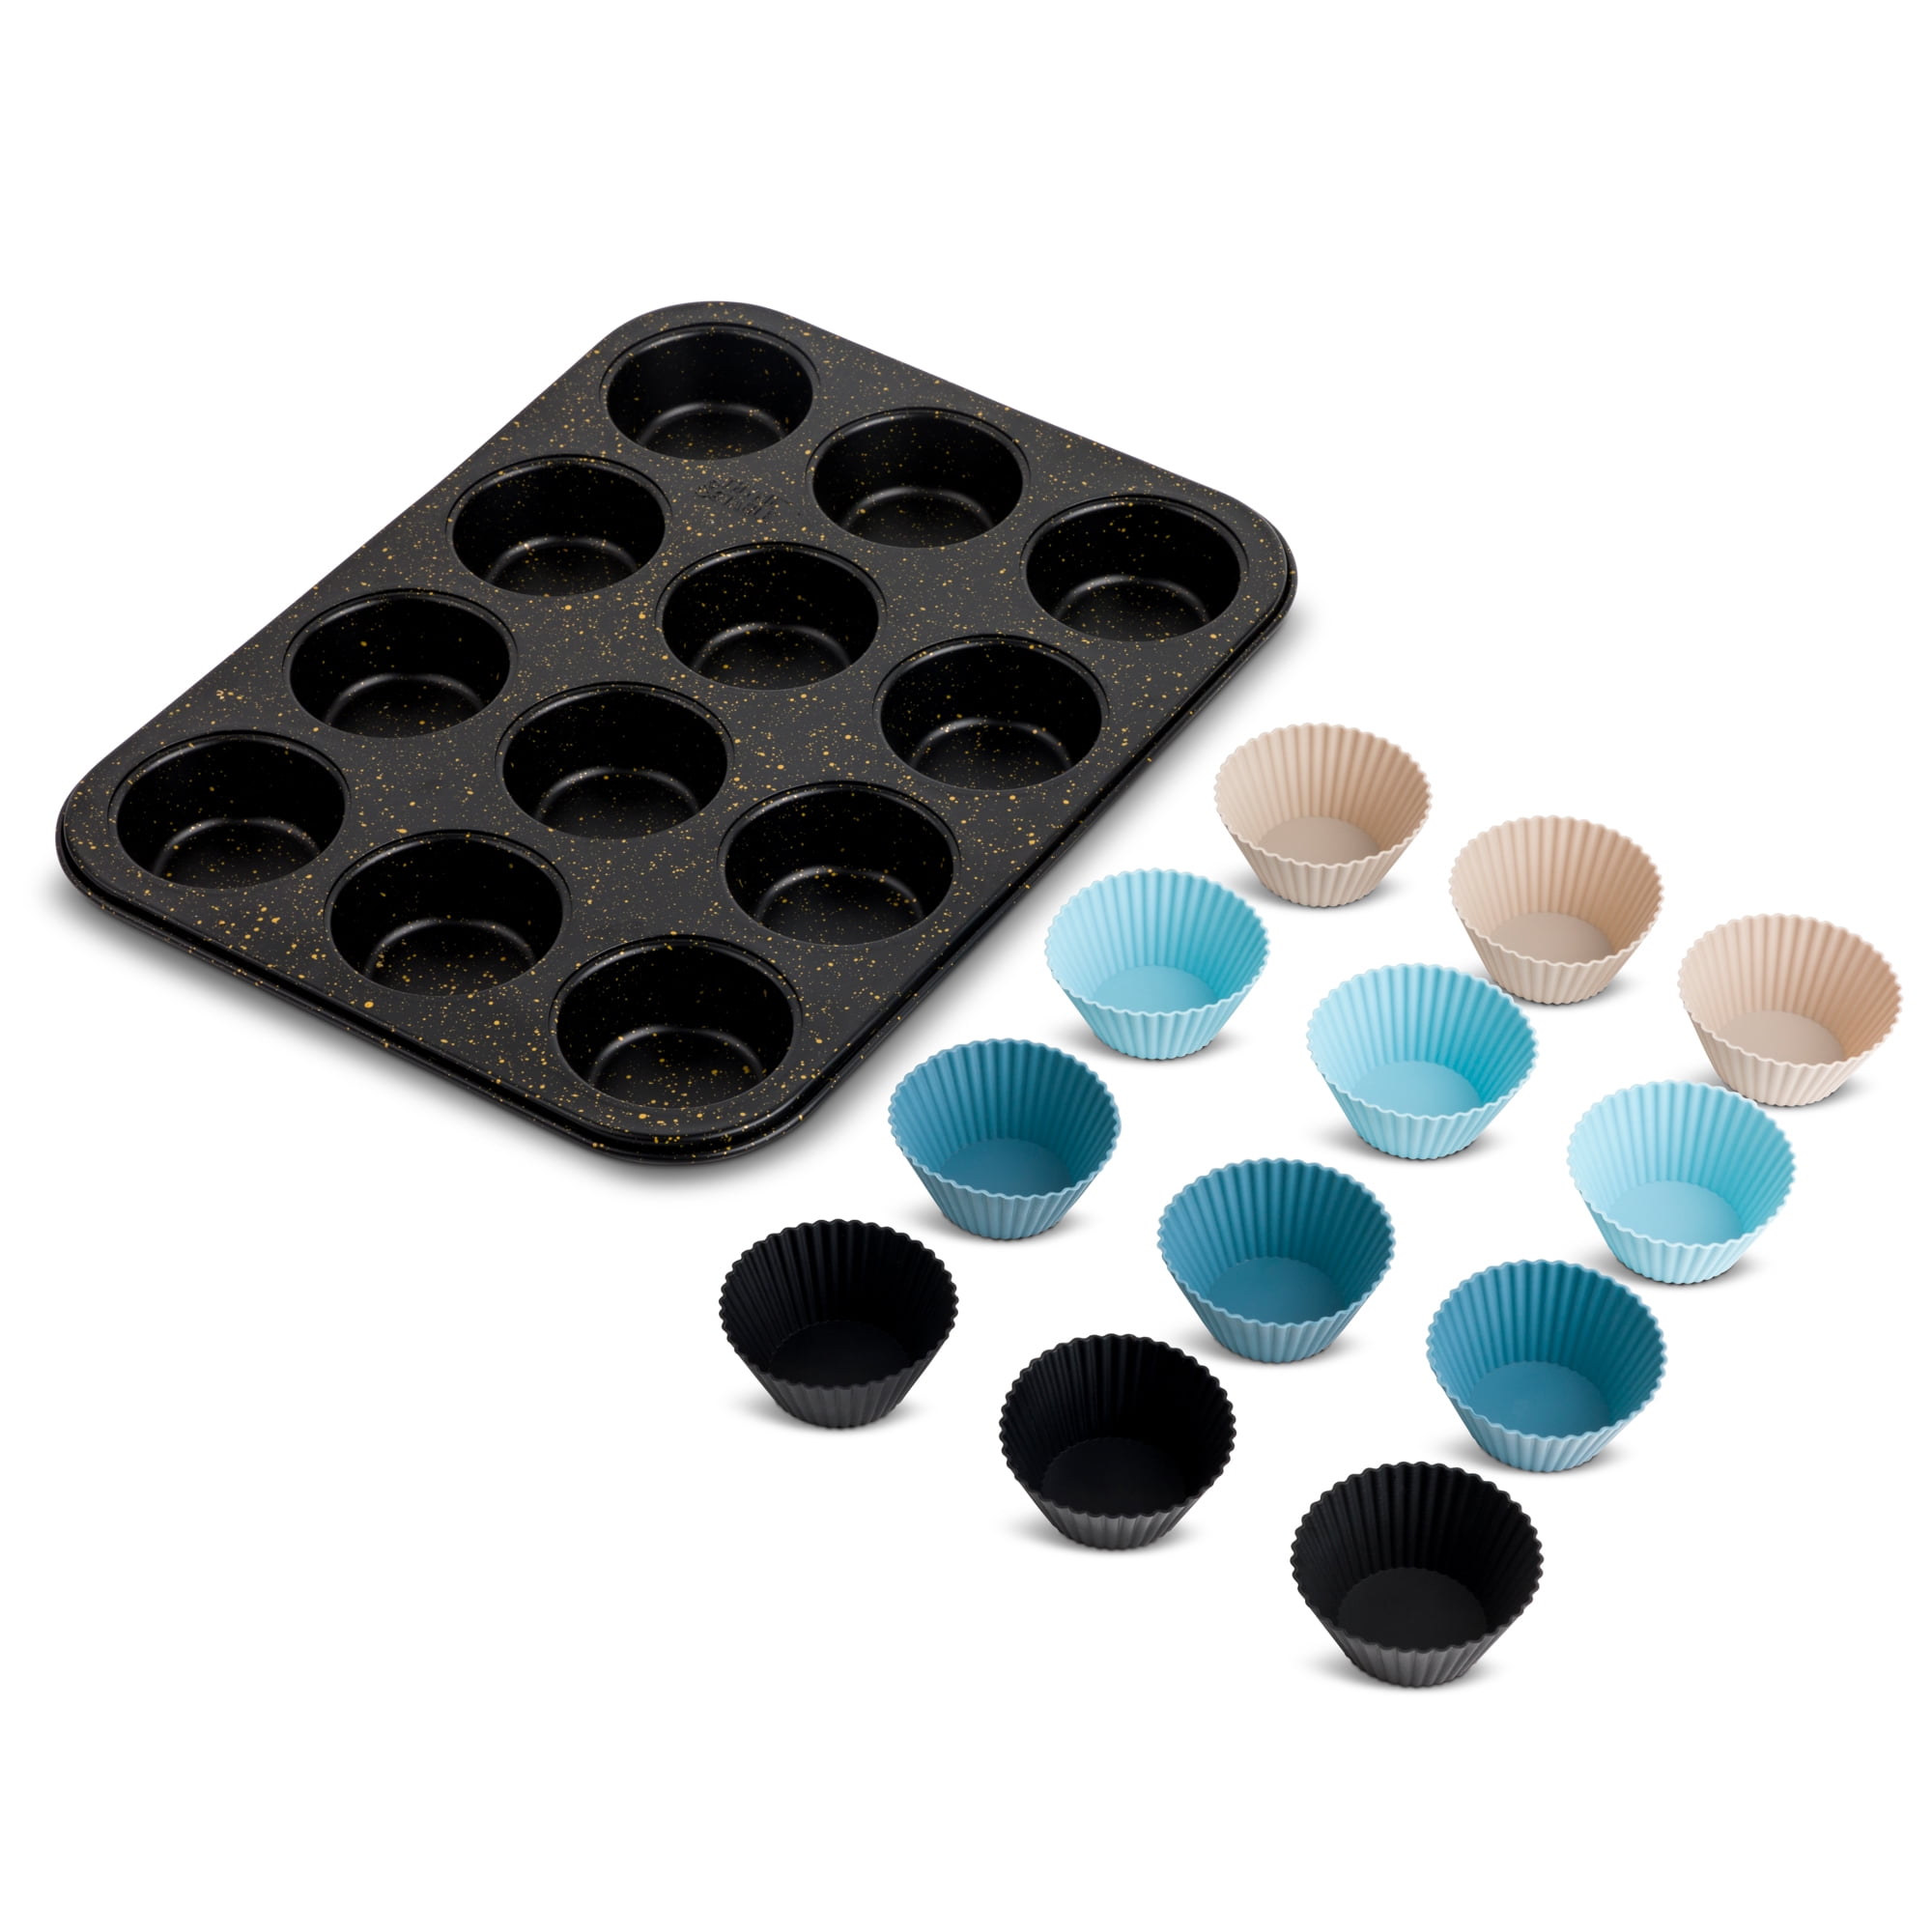 Cook's Essentials Set of (2) 12-Cup Silicone Muffin Pans 